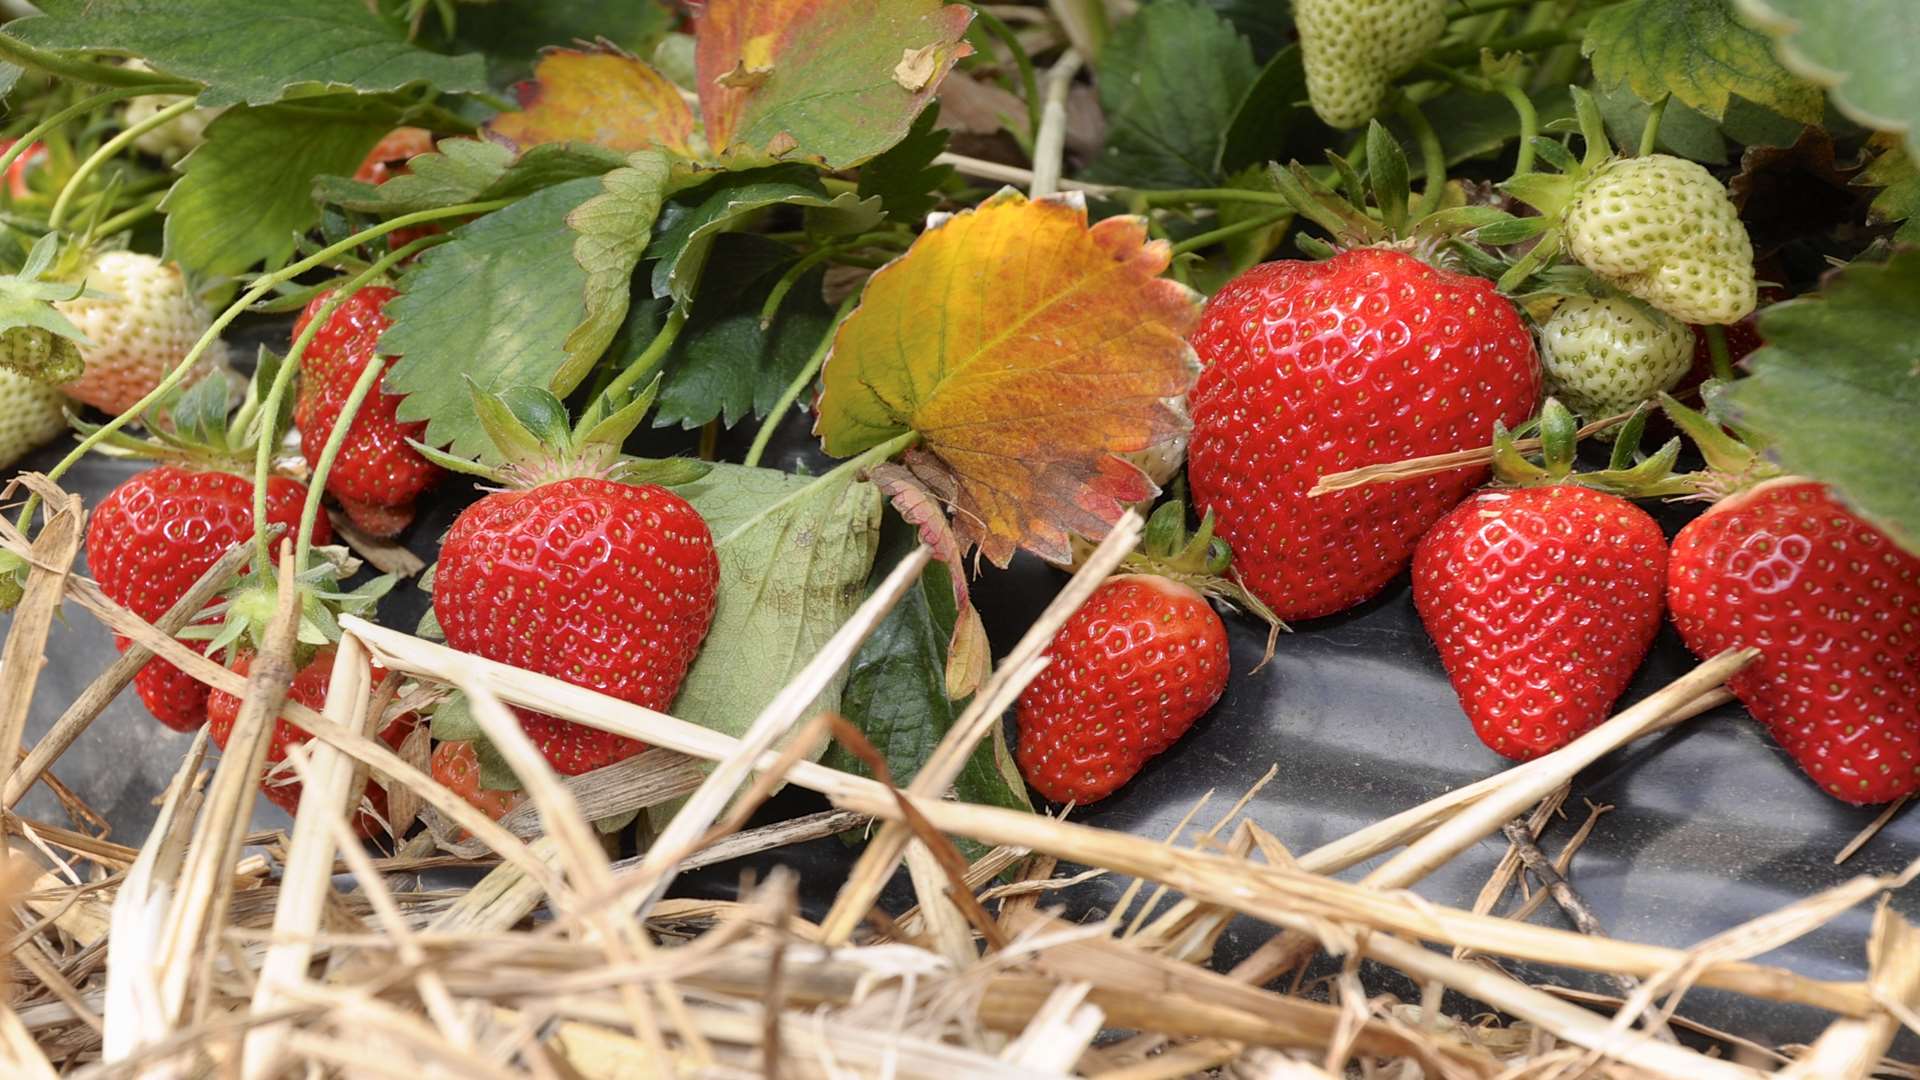 Strawberry farmers could improve their crops with new technology developed in Kent